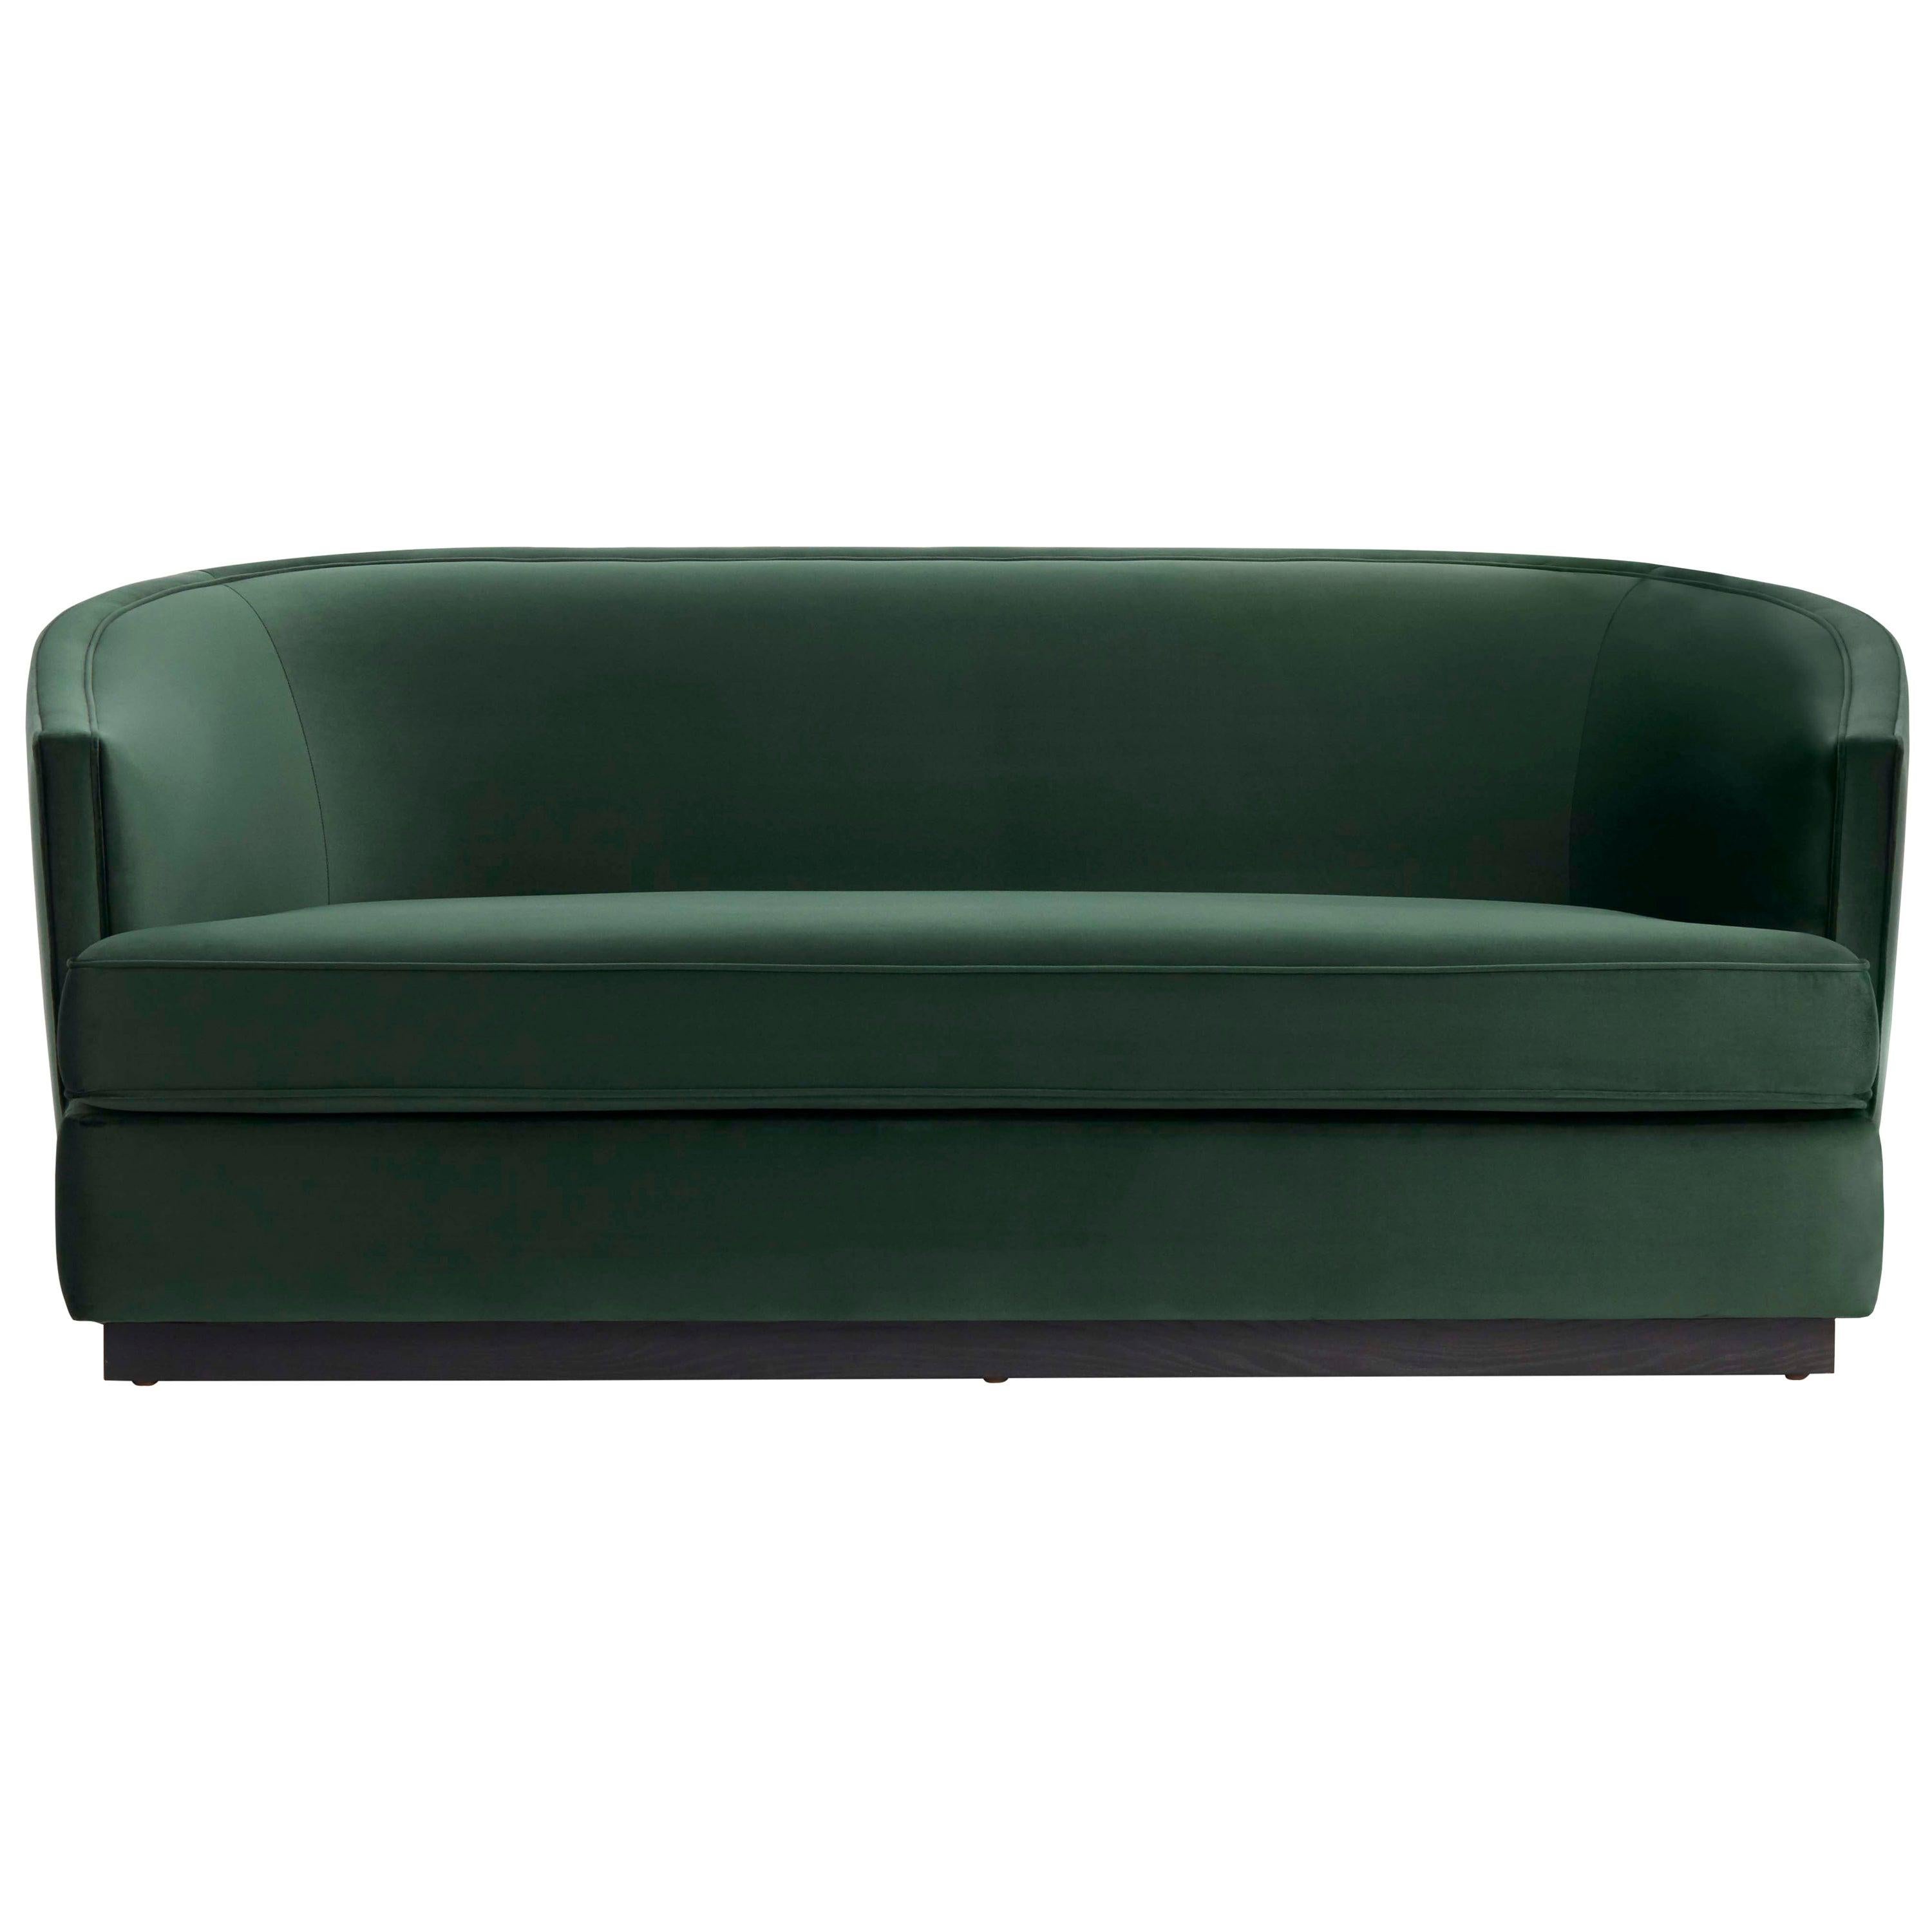 Green Romana 2-Seat Sofa with Painted Wooden Plinth For Sale